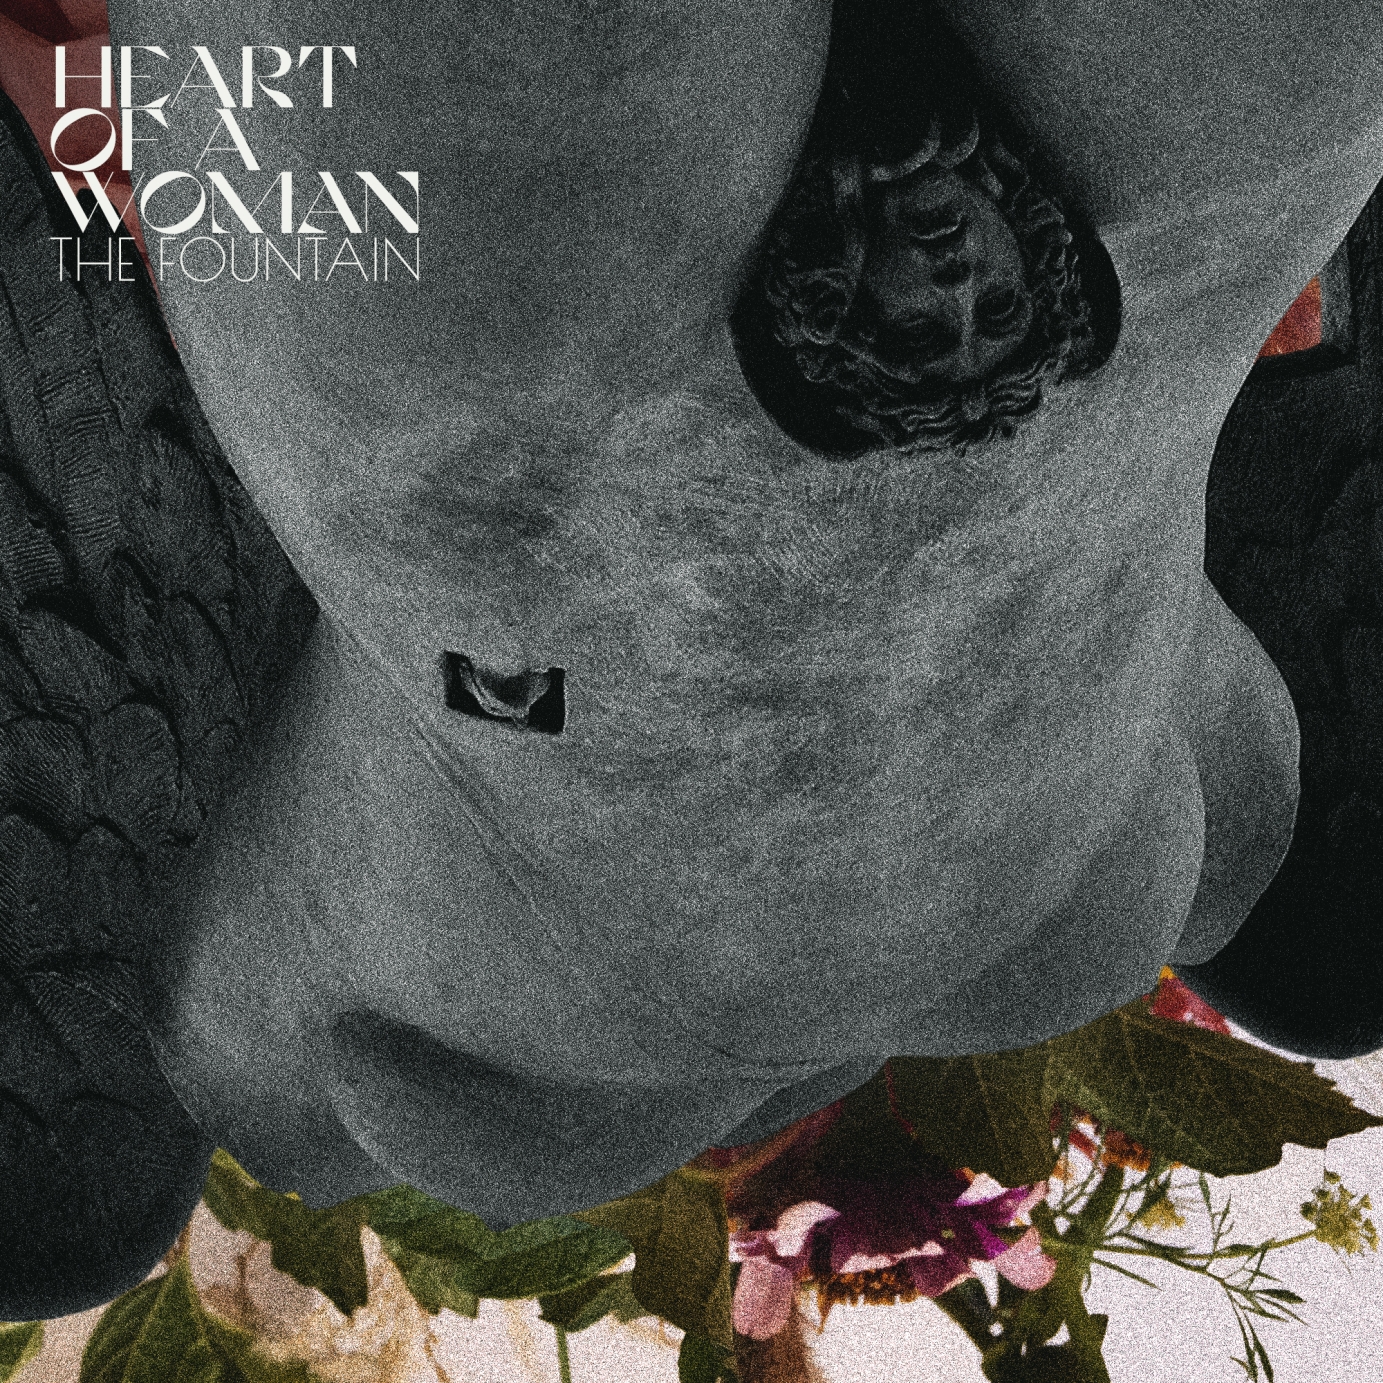 THE FOUNTAIN | Heart of a Woman (Single Cover)